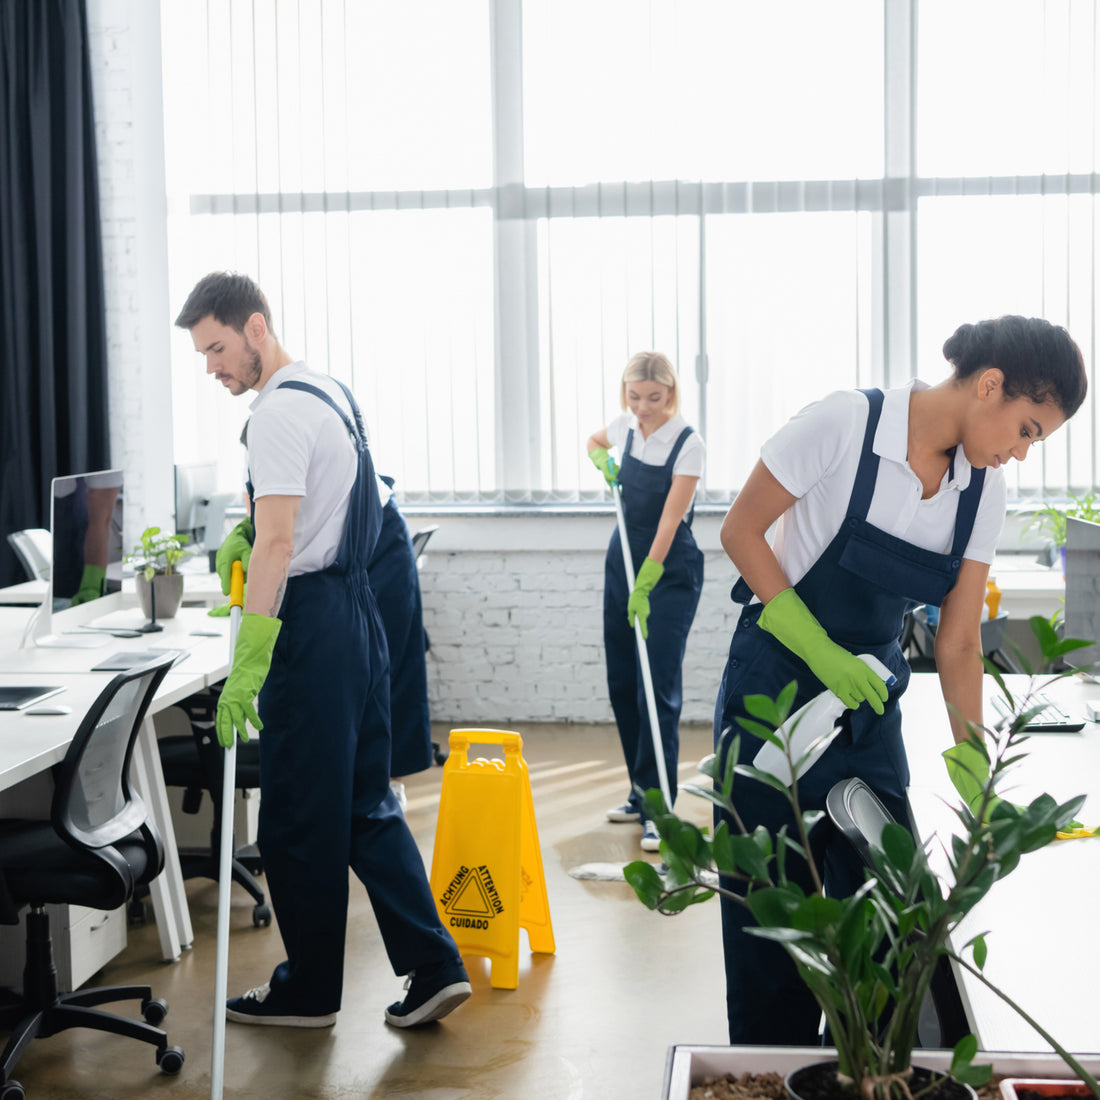 Three cleaners using green cleaning supplies to clean an office space, promoting eco-friendly practices and highlighting the benefits of using sustainable cleaning products in the workplace.